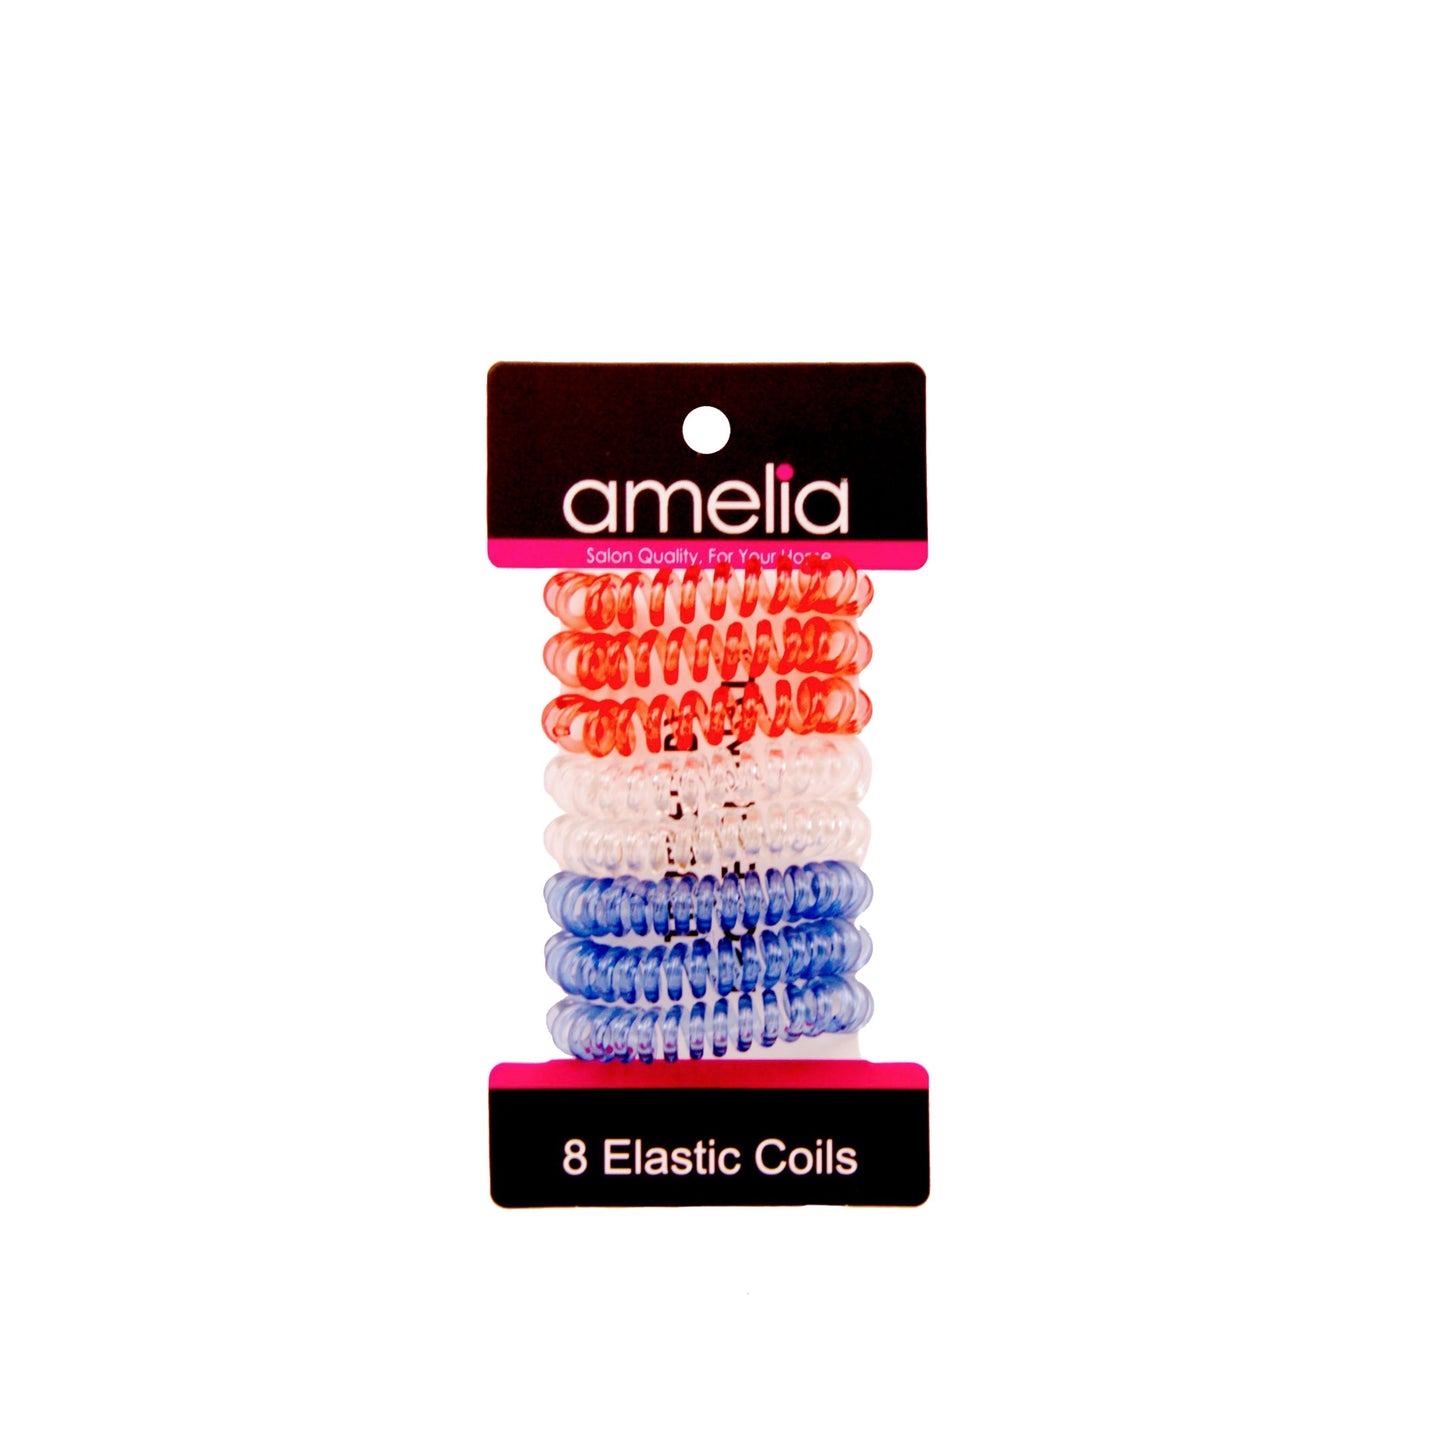 Amelia Beauty Products 8 Small Elastic Hair Coils, 1.5in Diameter Thick Spiral Hair Ties, Gentle on Hair, Strong Hold and Minimizes Dents and Creases, Red, Clear and Blue